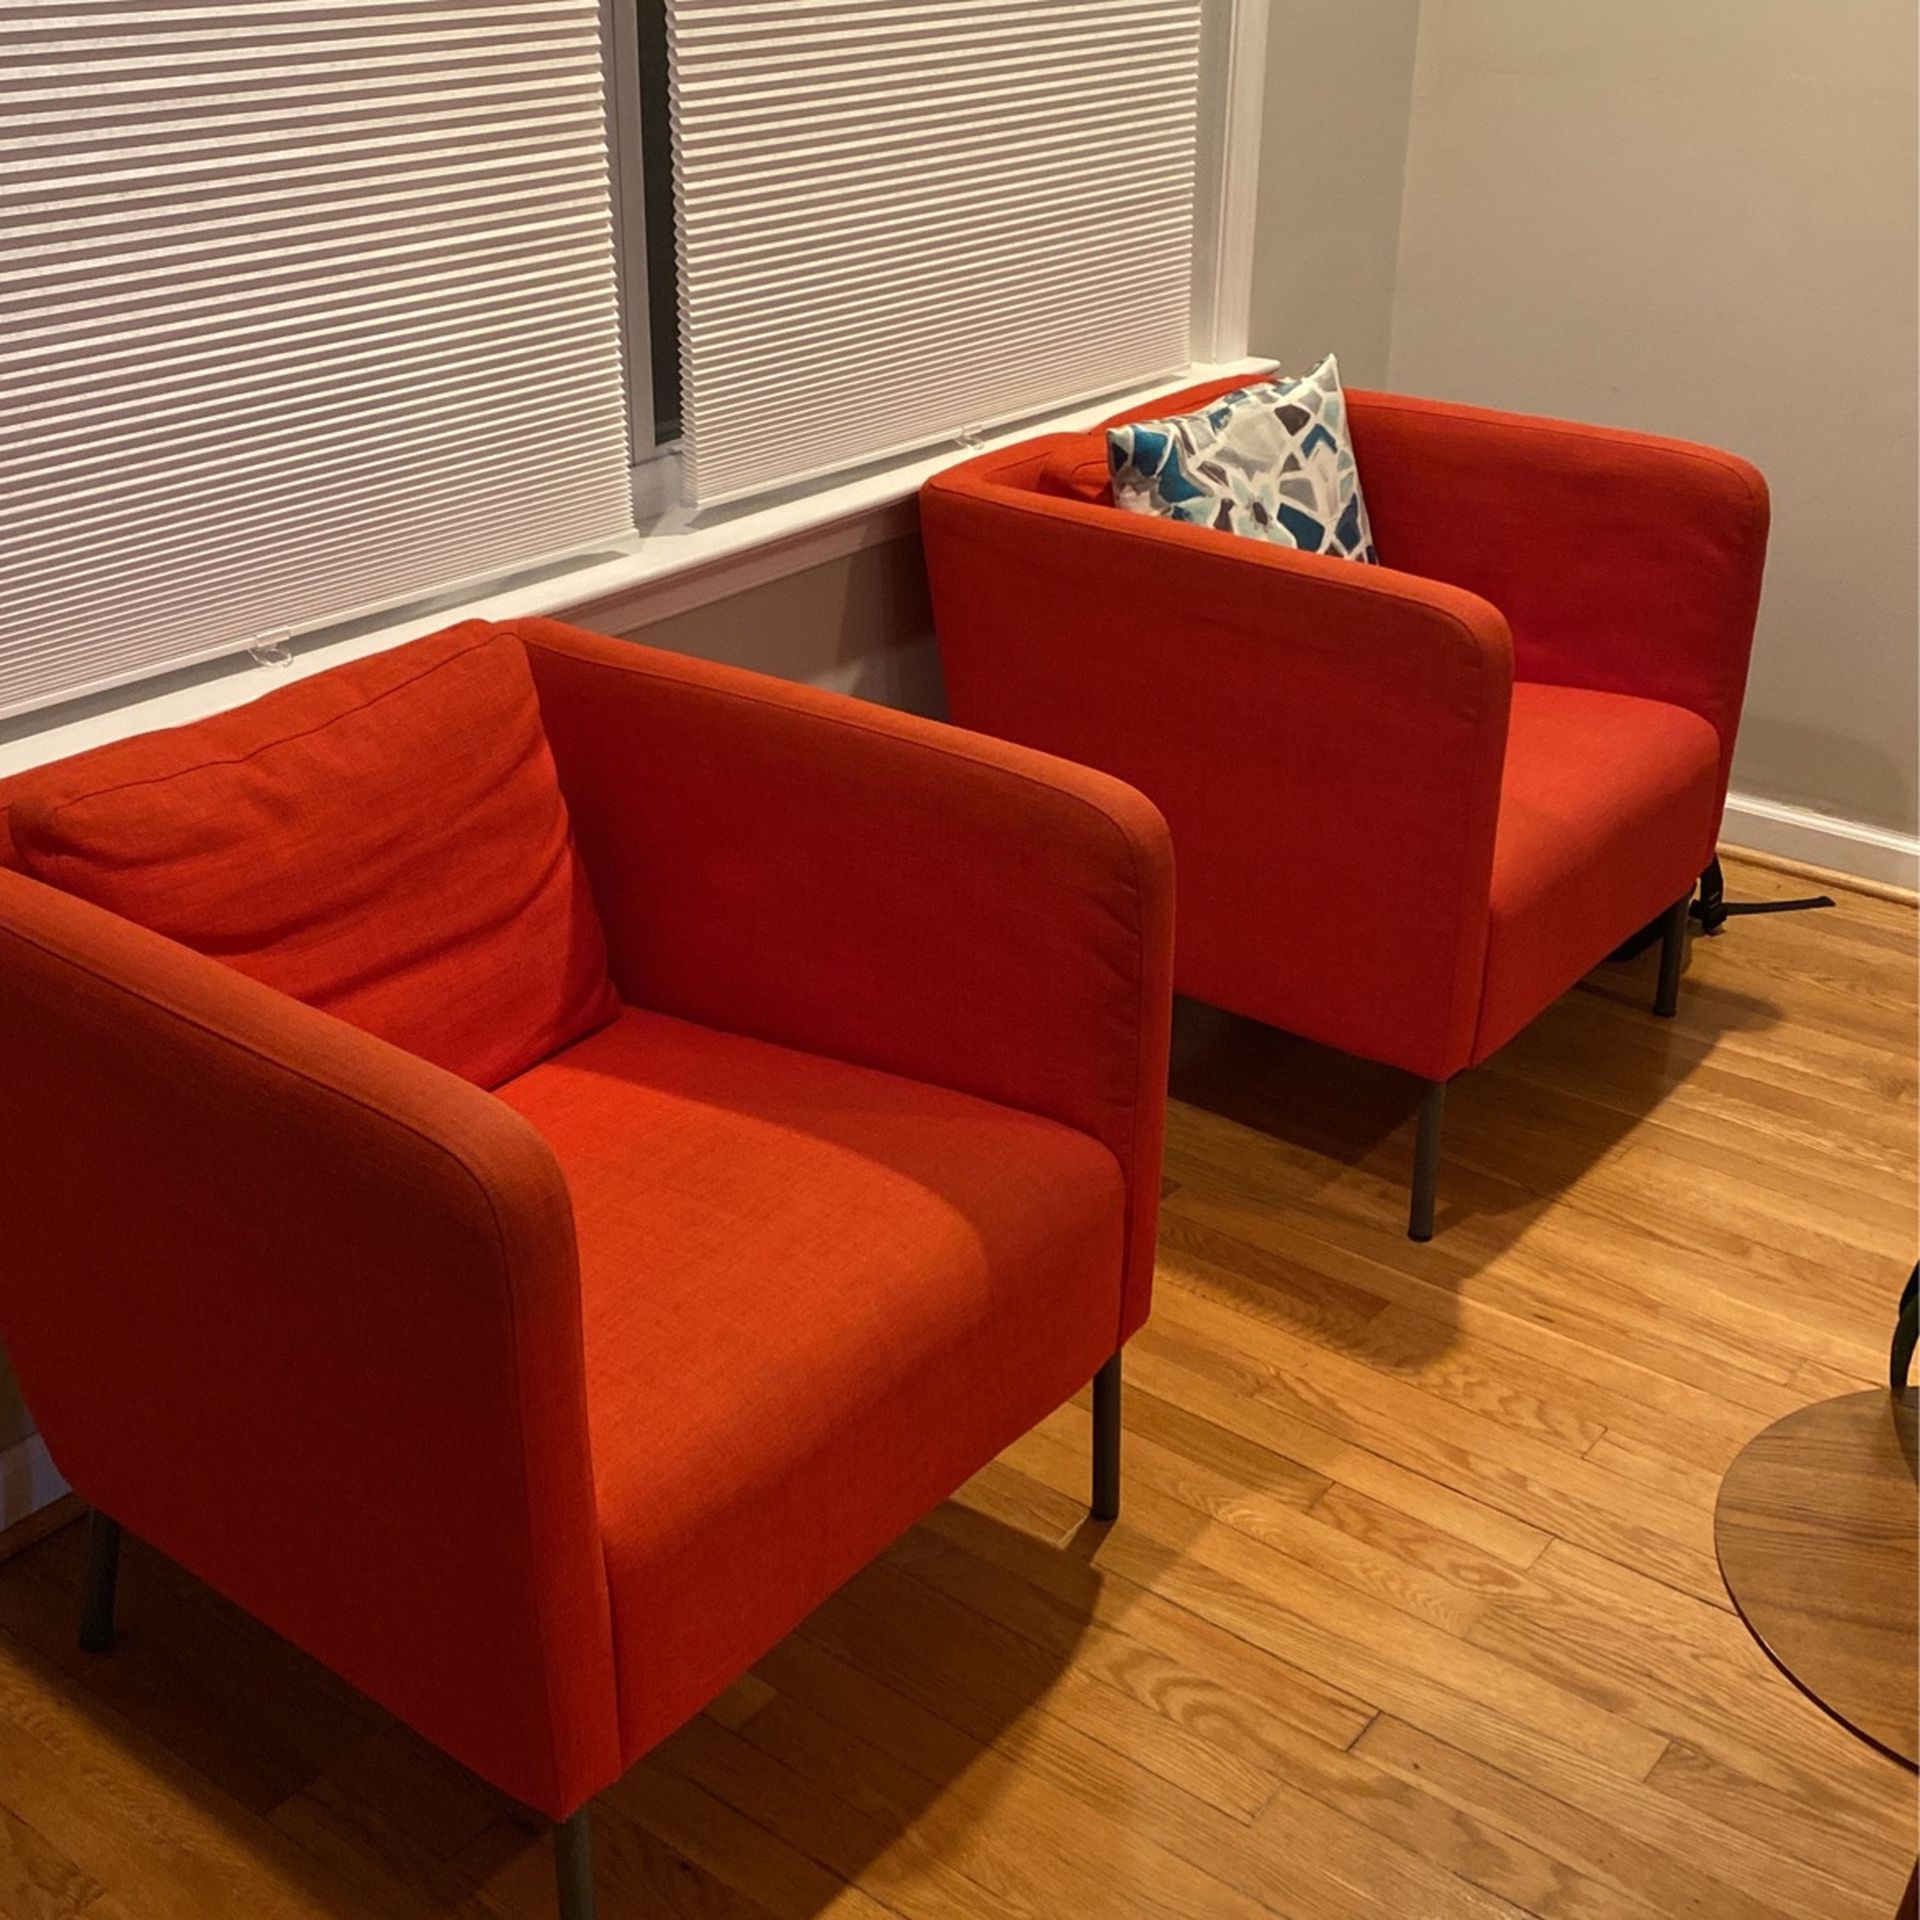 Two Red Couch Chairs